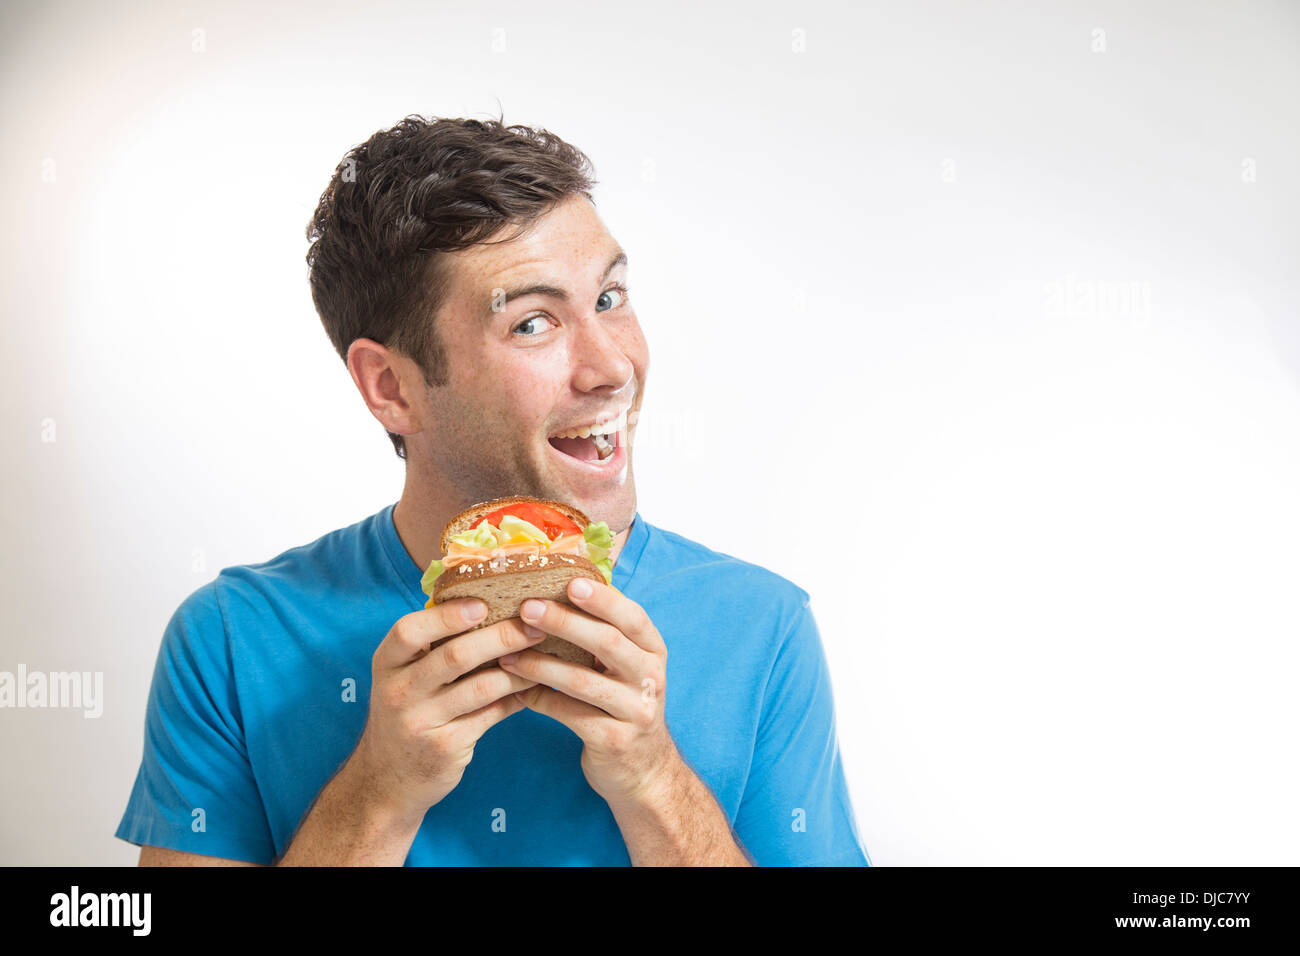 Males hands holding sandwich and thermos mug during eating his lunch Stock  Photo - Alamy